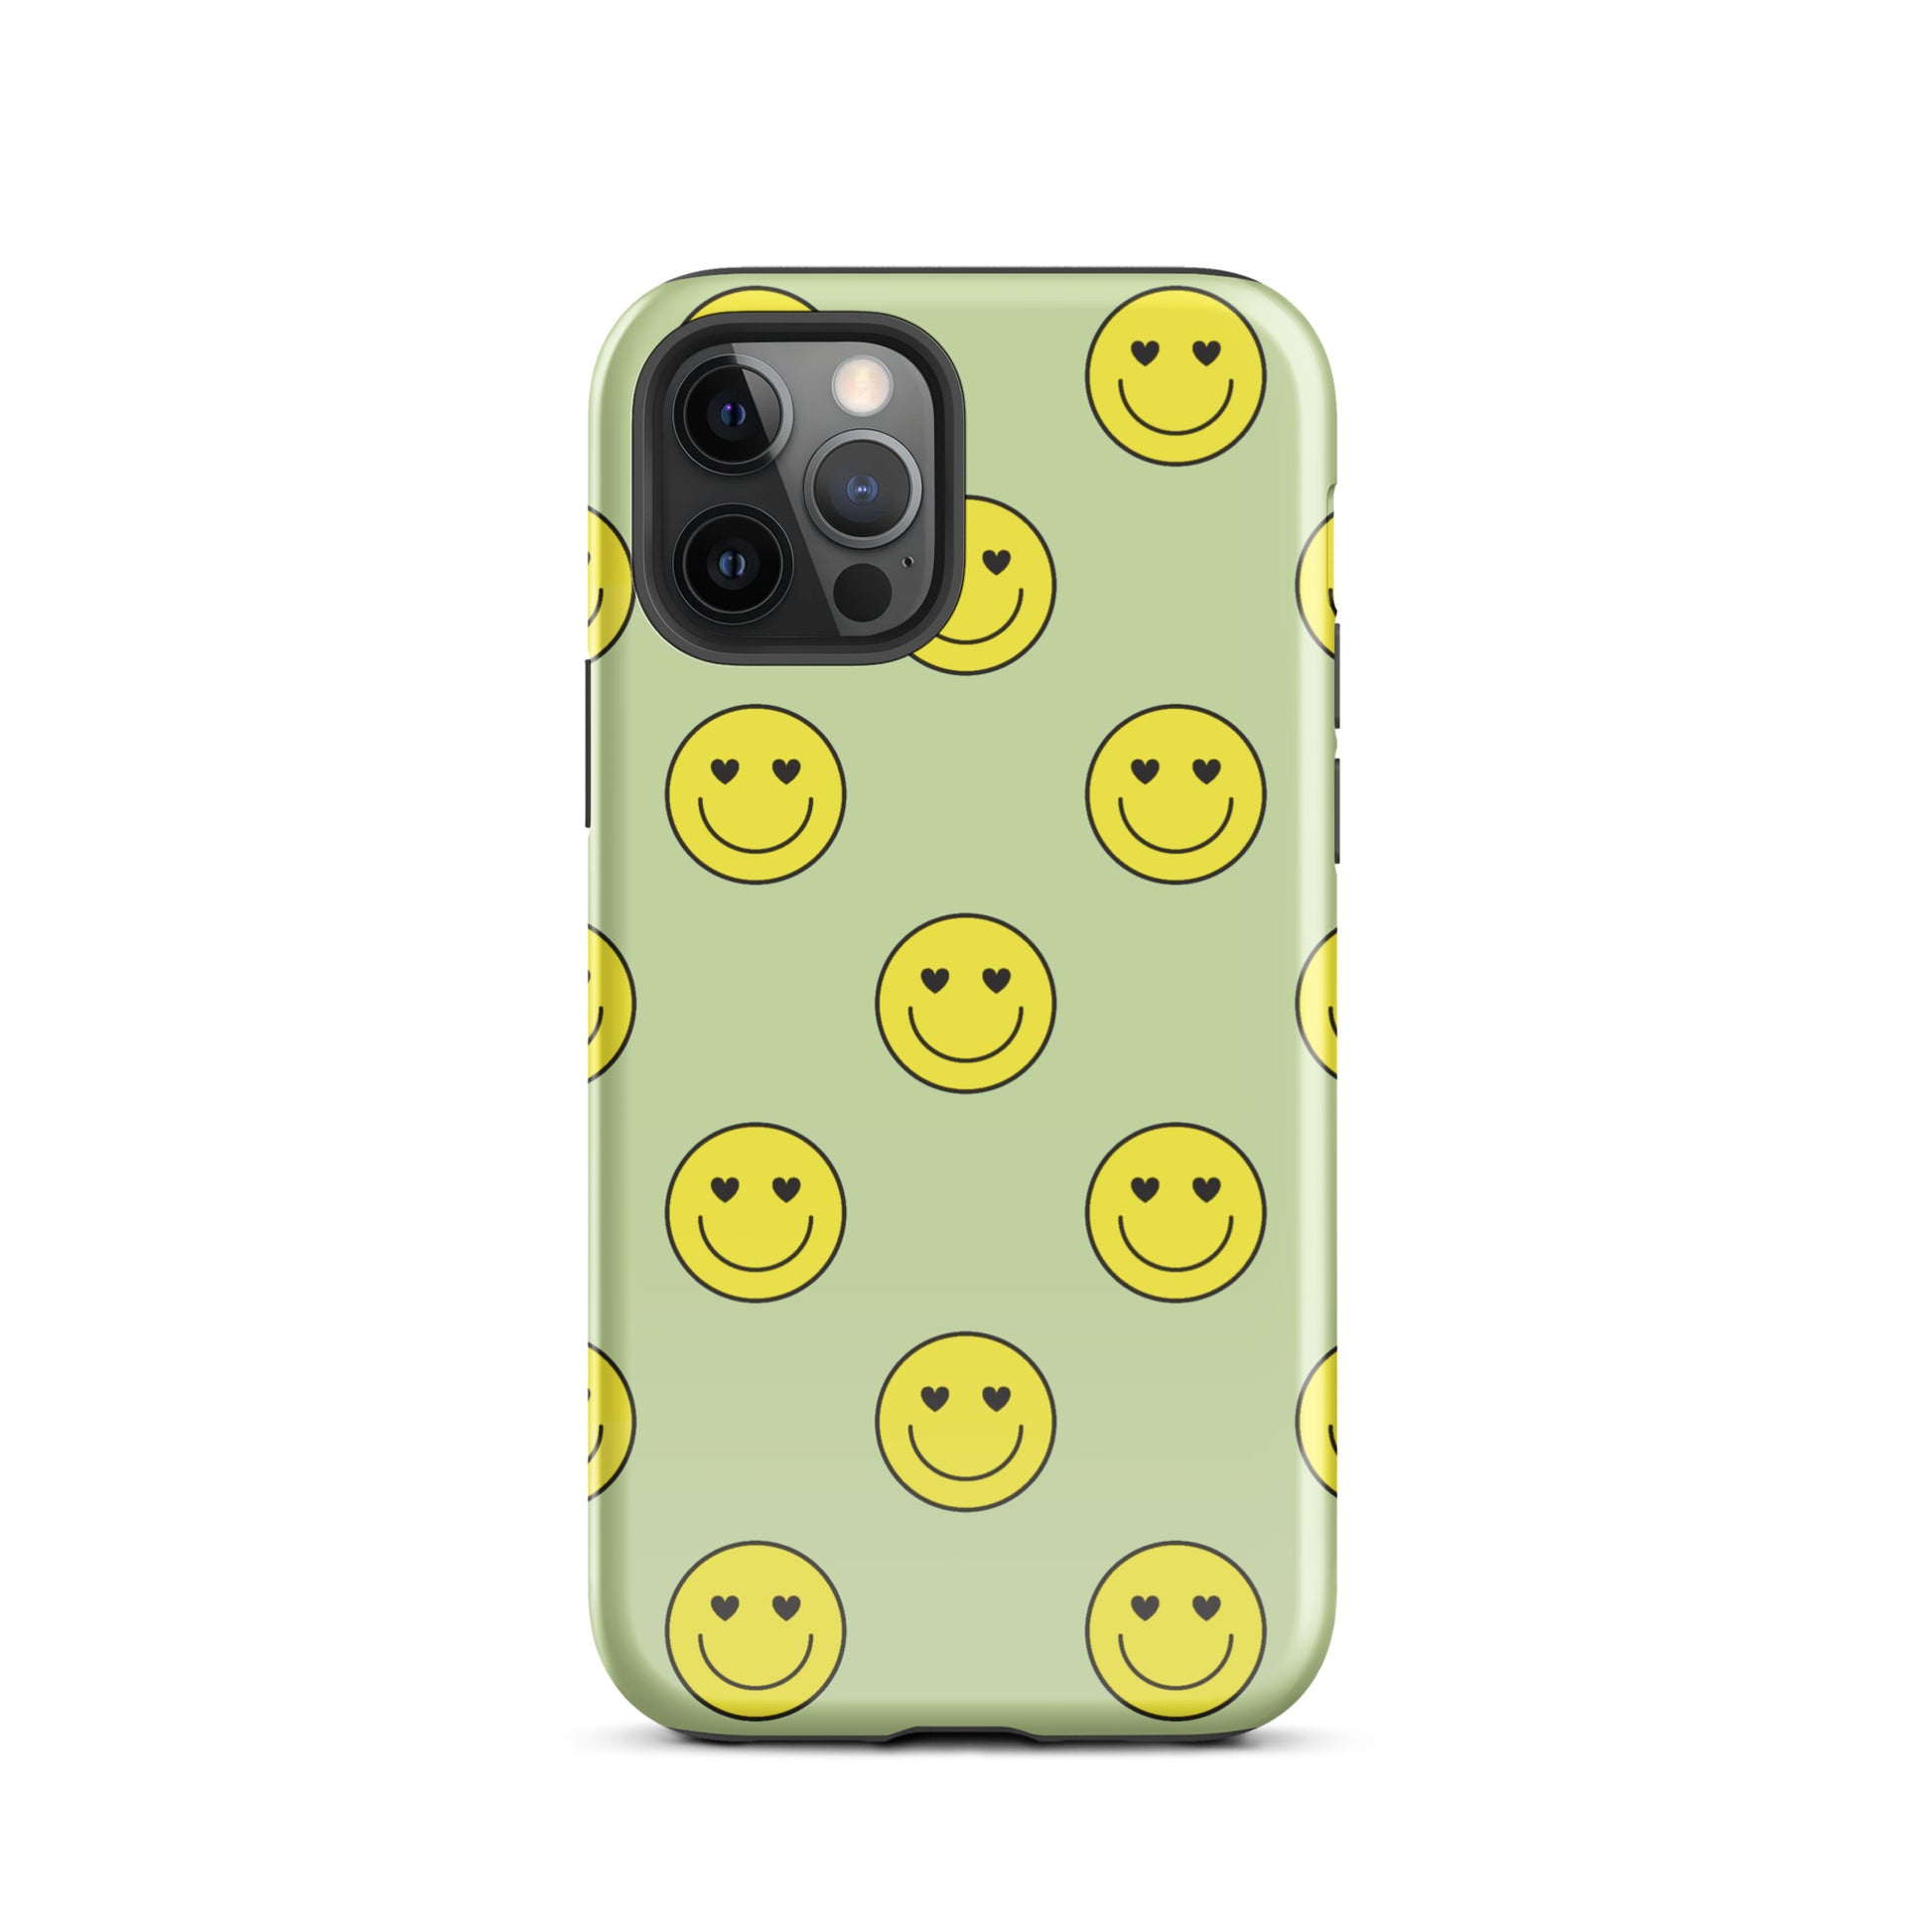 Neon Smiley Faces iPhone Case iPhone 12 Pro Glossy